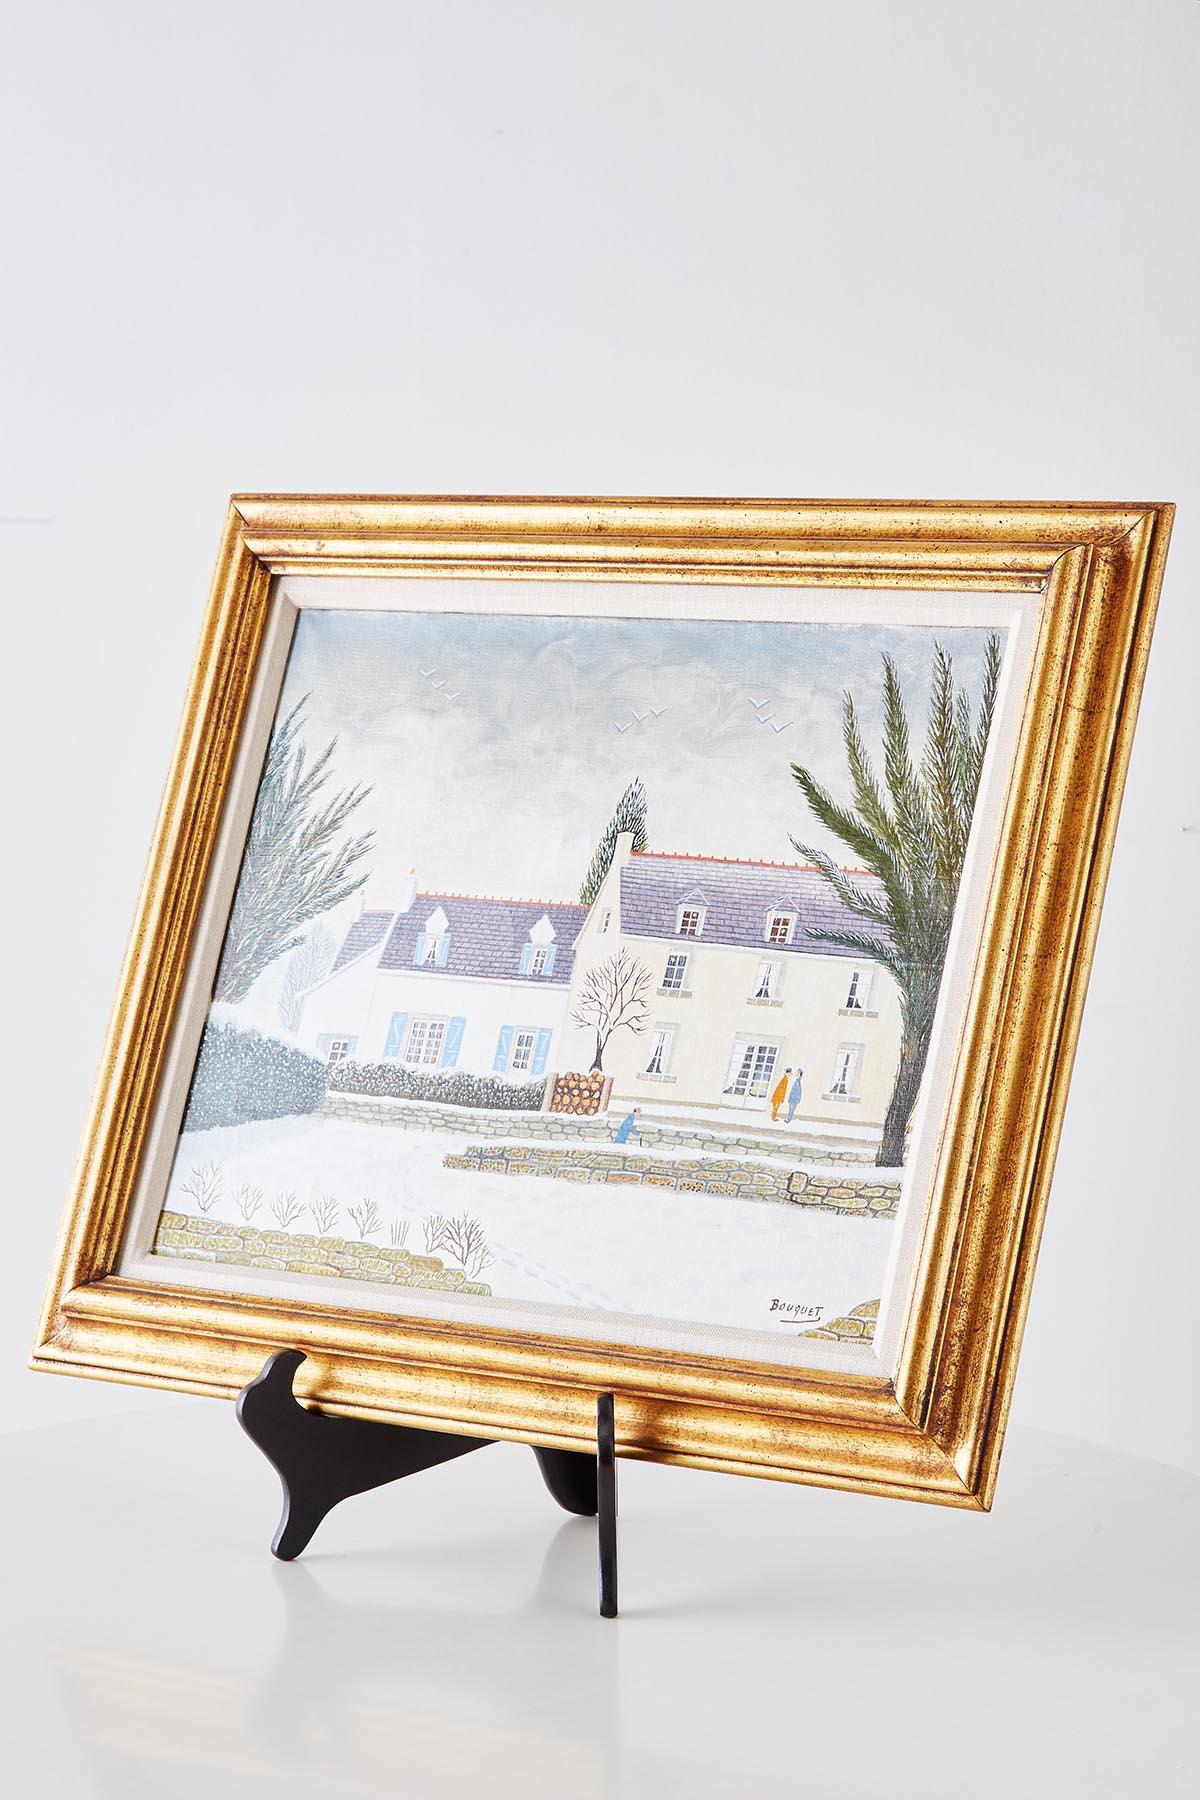 House With Snow Oil on Canvas - Folk Art Painting by André Bouquet.